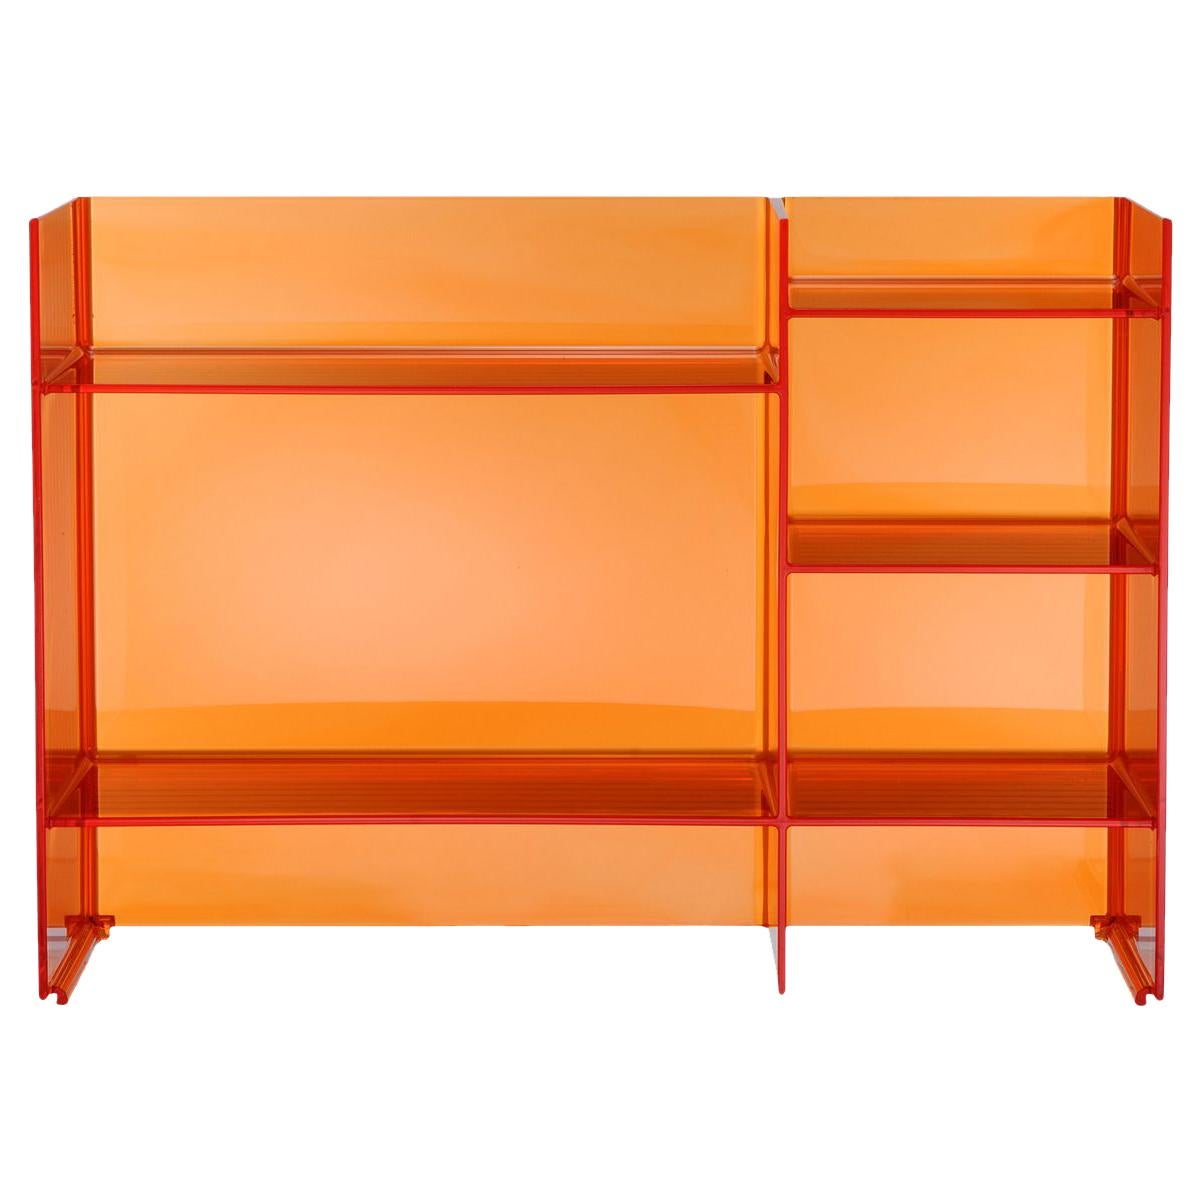 Kartell Sound Rack Modular Bookcase in Tangerine by Ludovica and Roberto Palomba